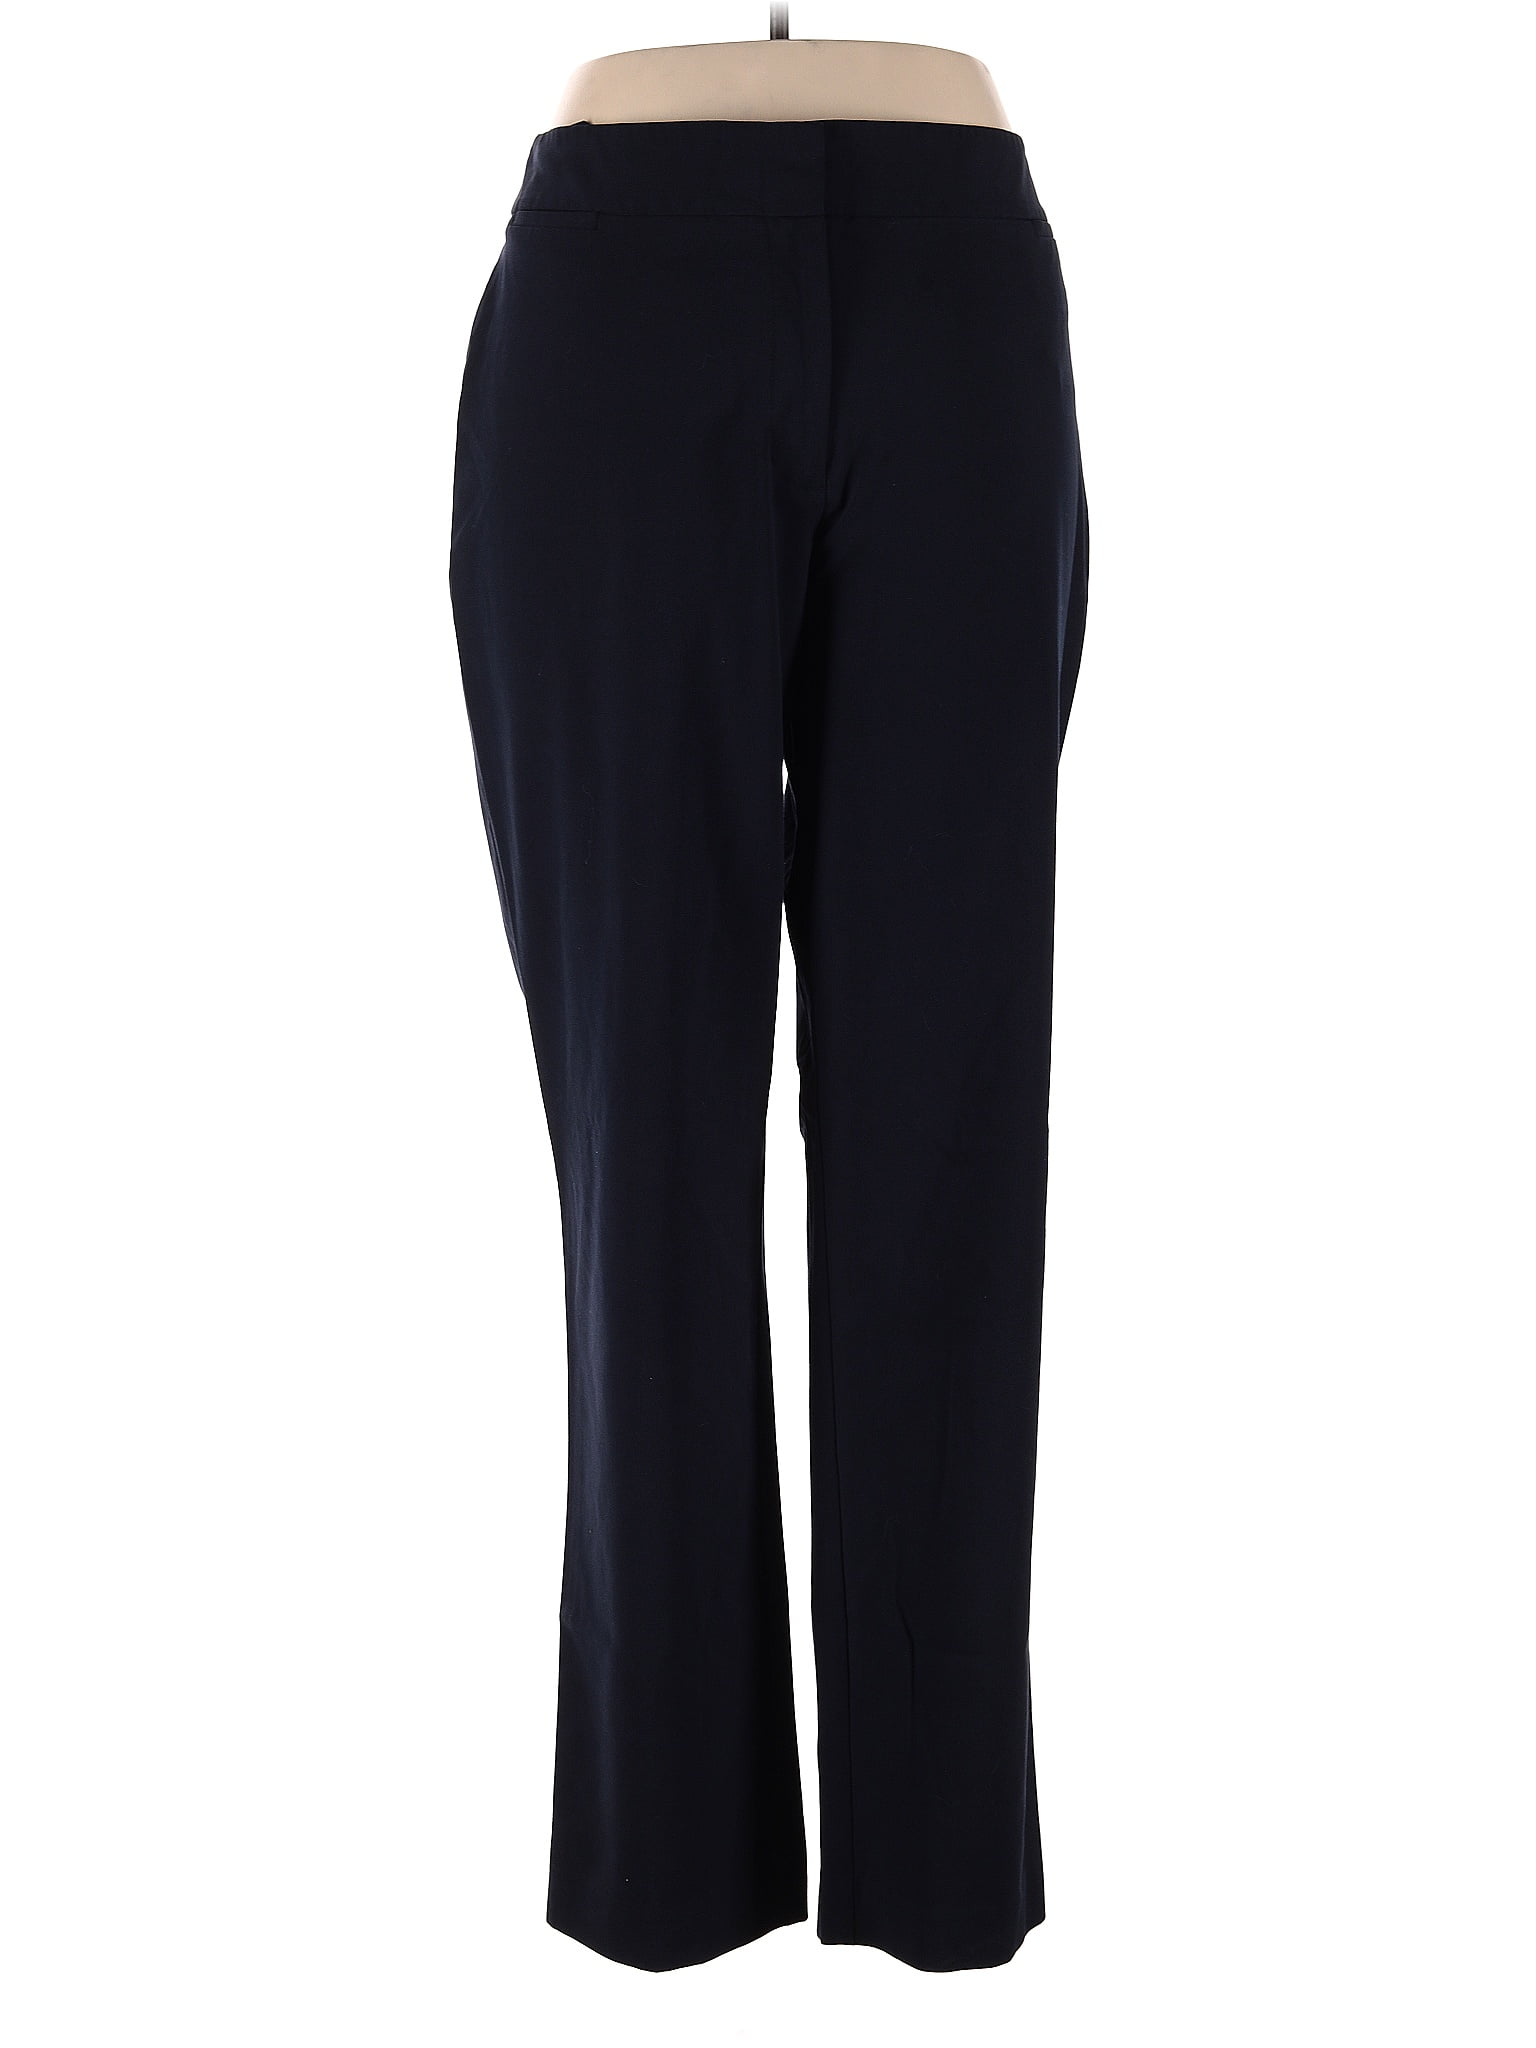 Assorted Brands Solid Navy Blue Yoga Pants Size XL - 63% off